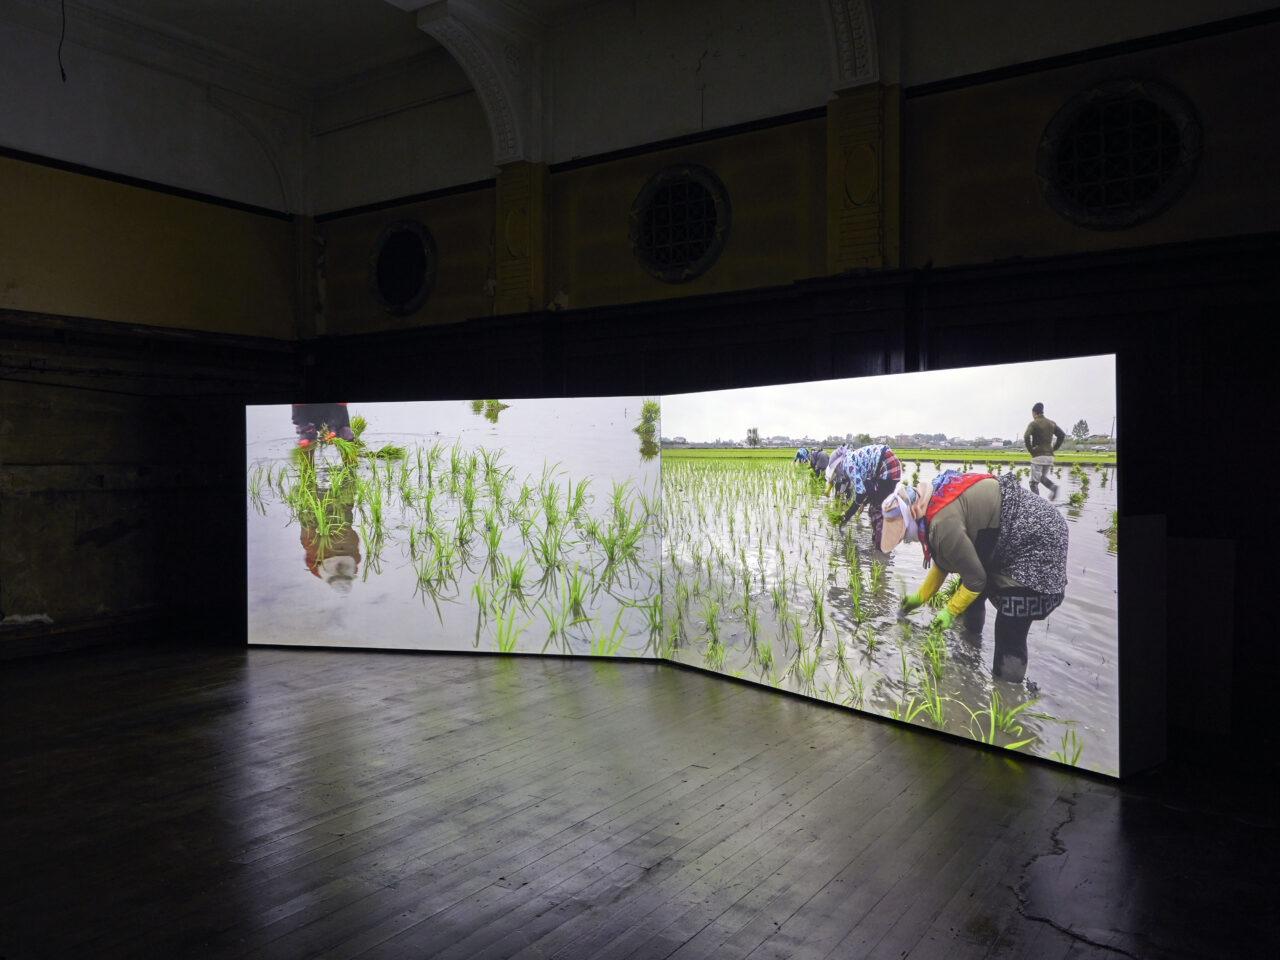 A dual-screen film, it shows people planting into a flooded field.